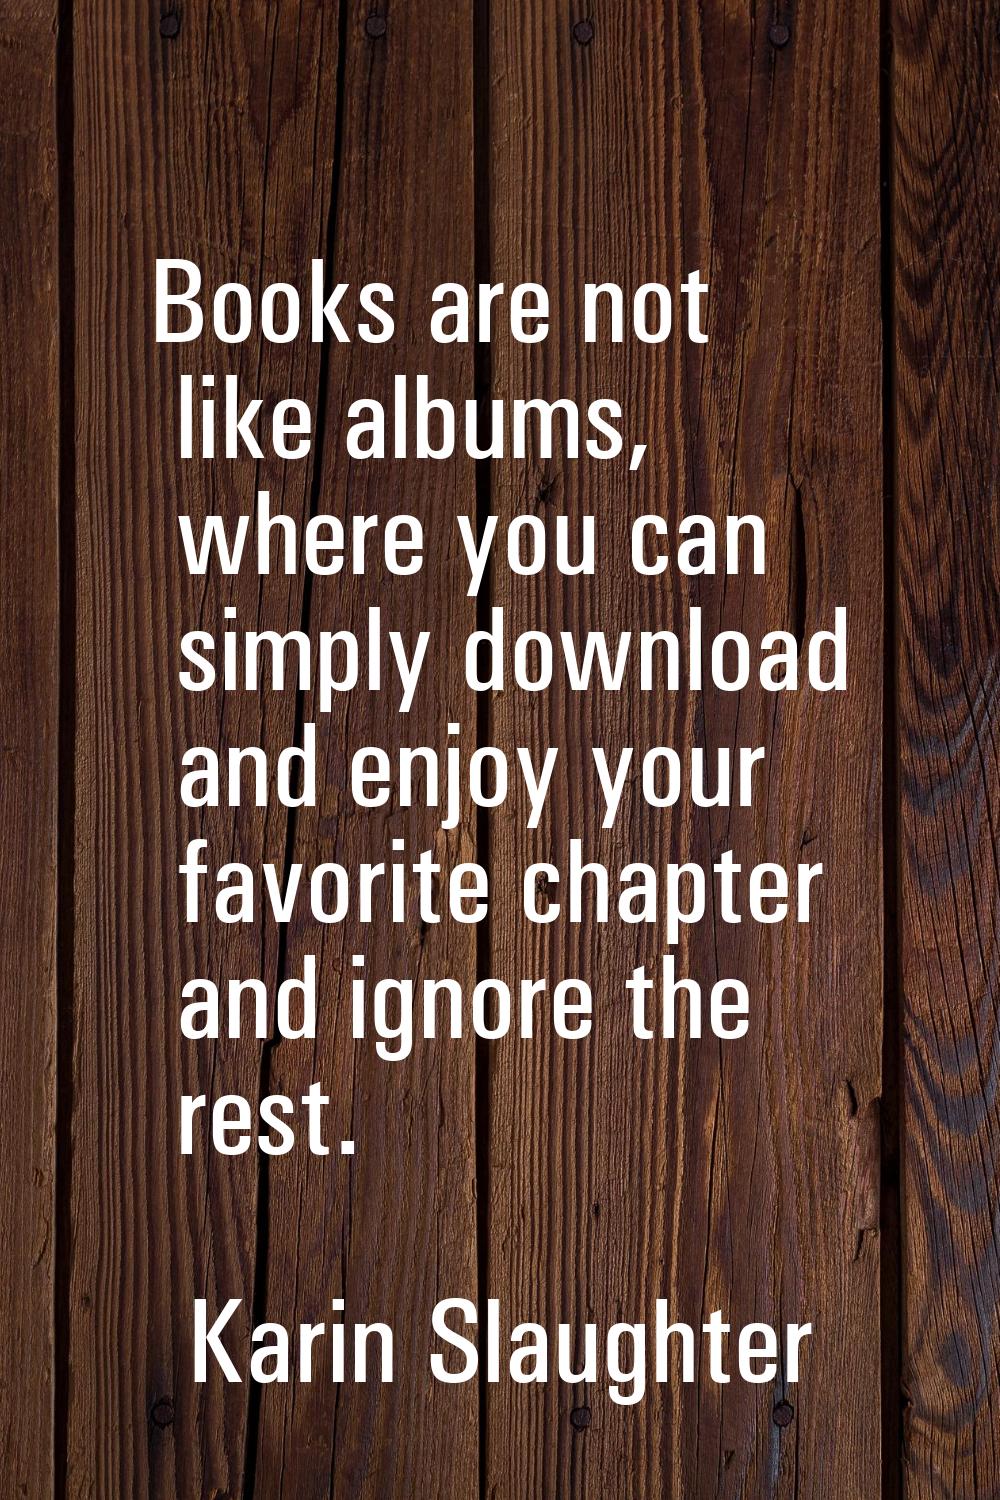 Books are not like albums, where you can simply download and enjoy your favorite chapter and ignore